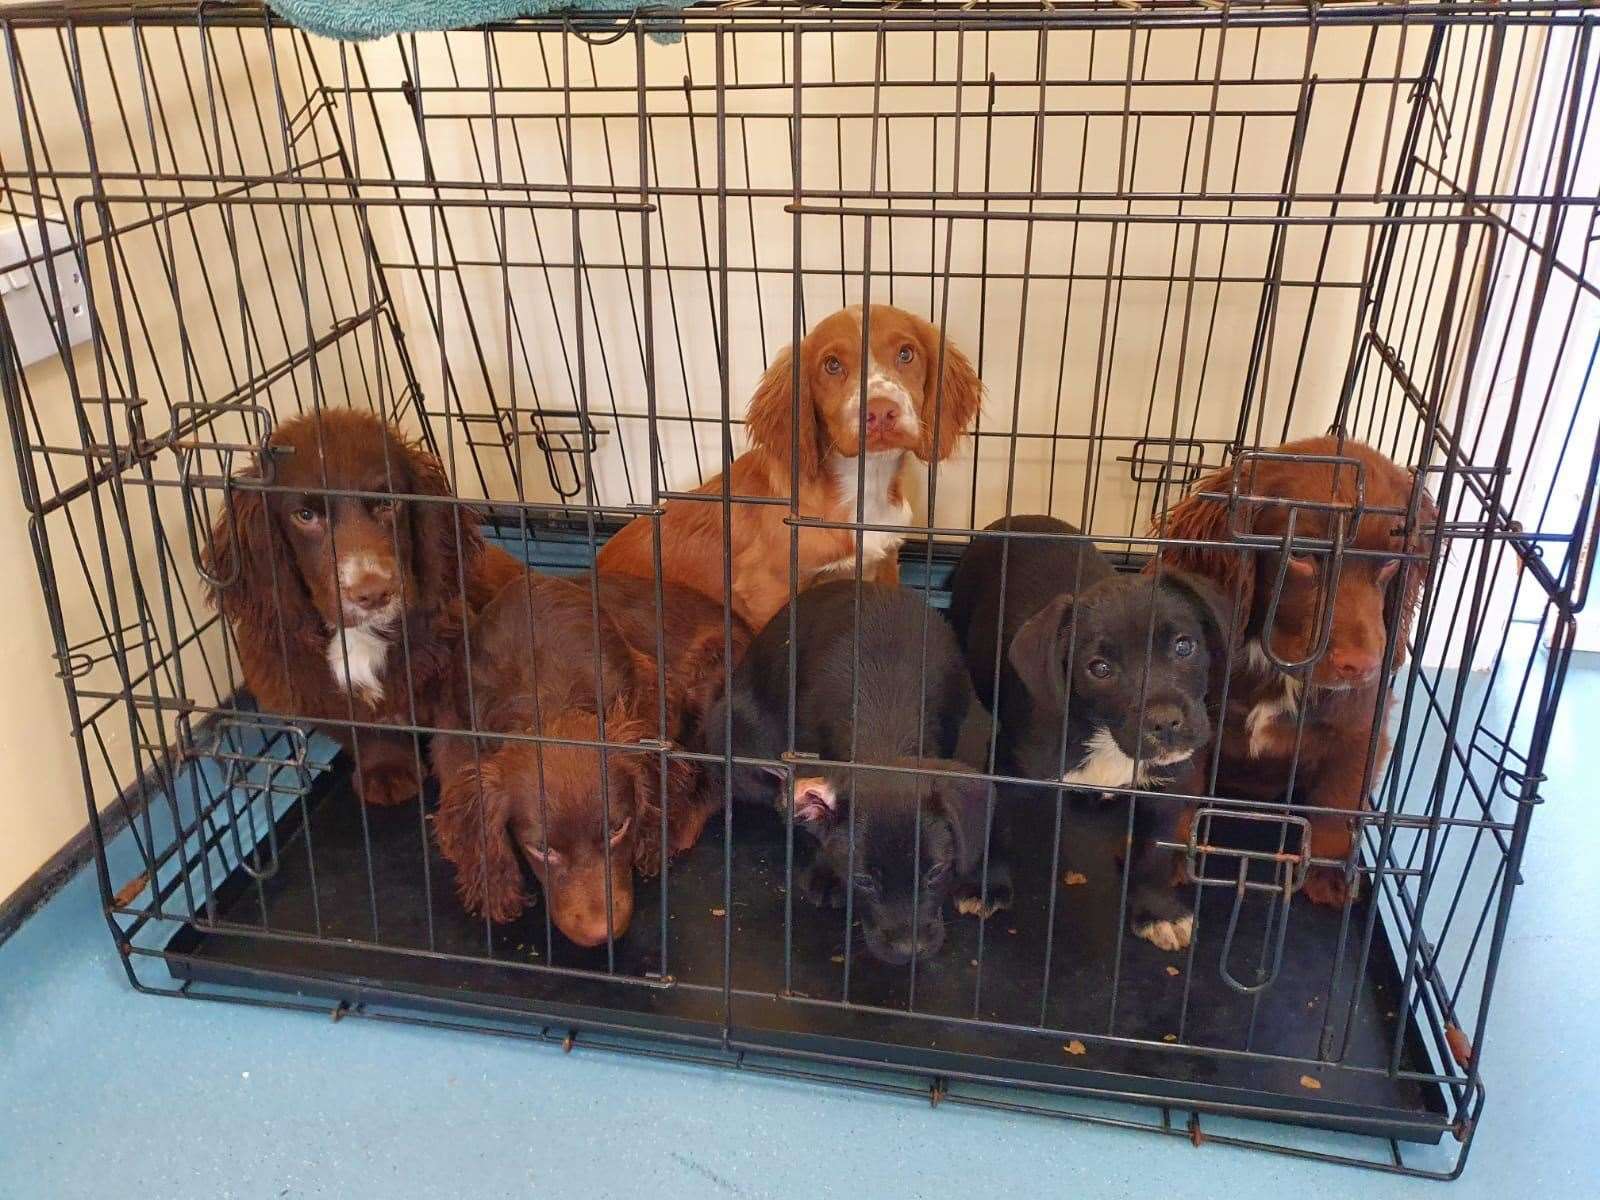 Chester was found on a grassy verge in this cage with his siblings. Picture: RSPCA and Surrey Police